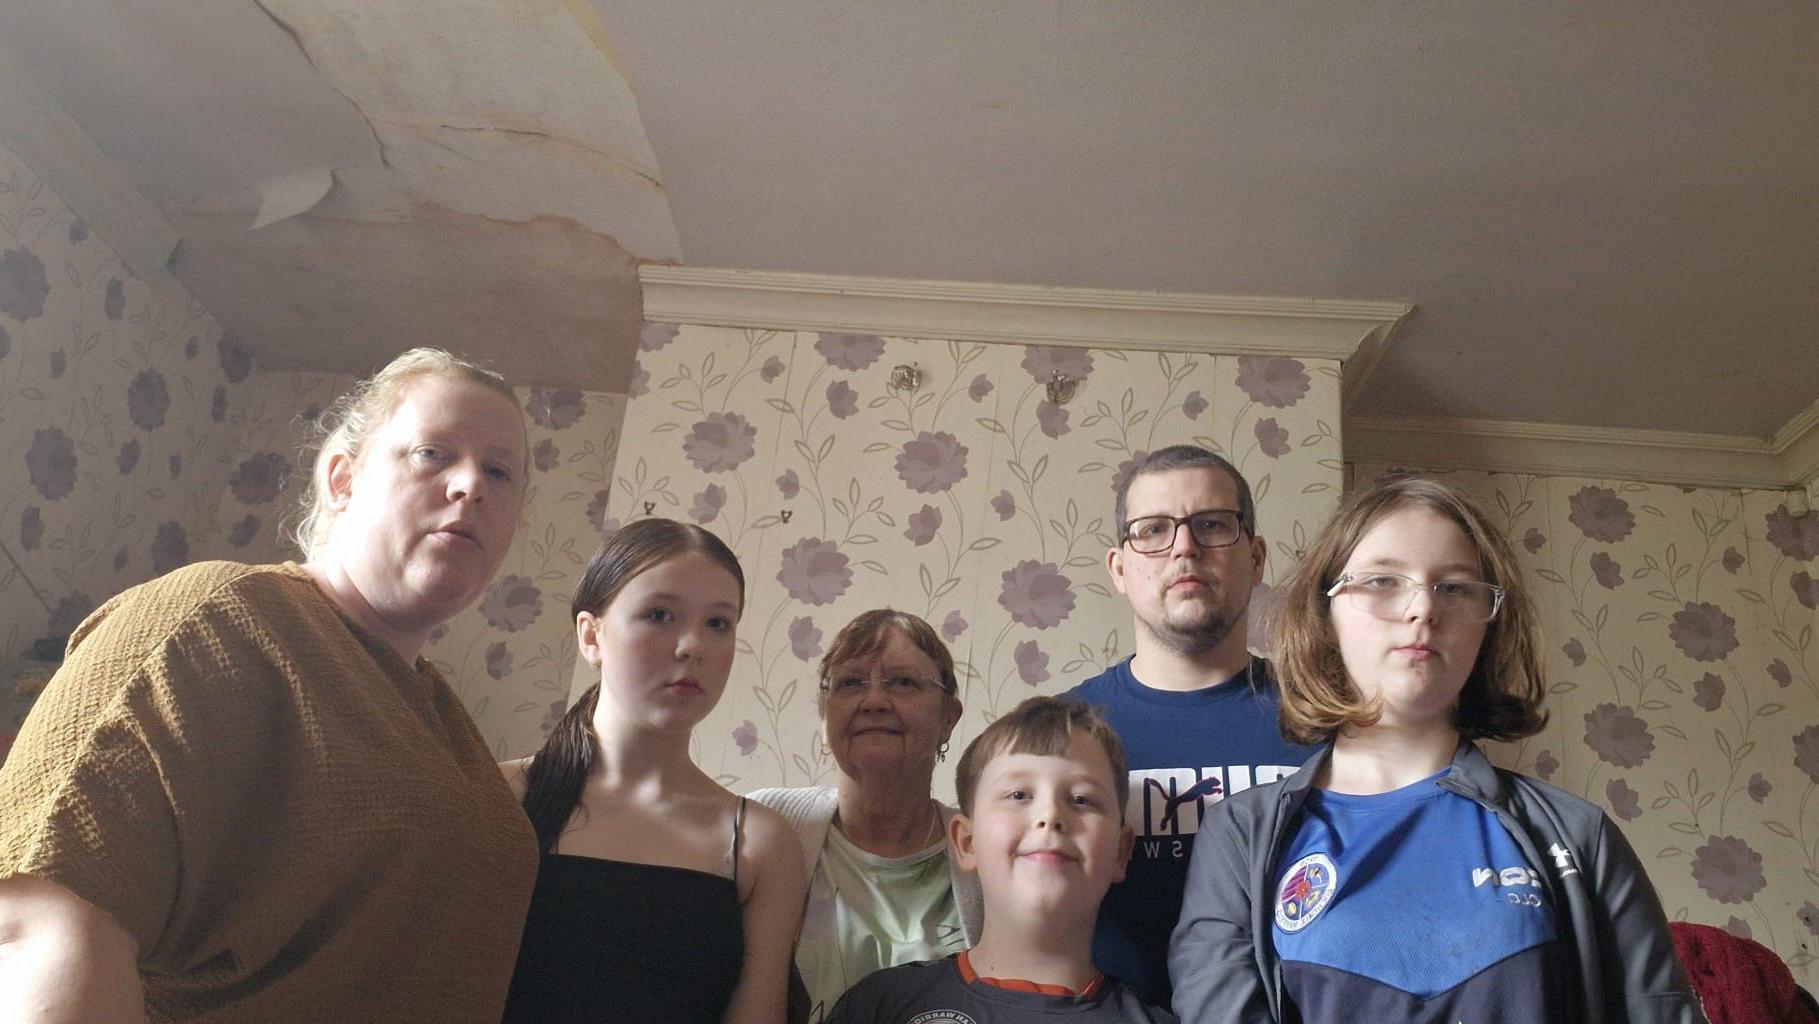 family homeless after builder abandons extension